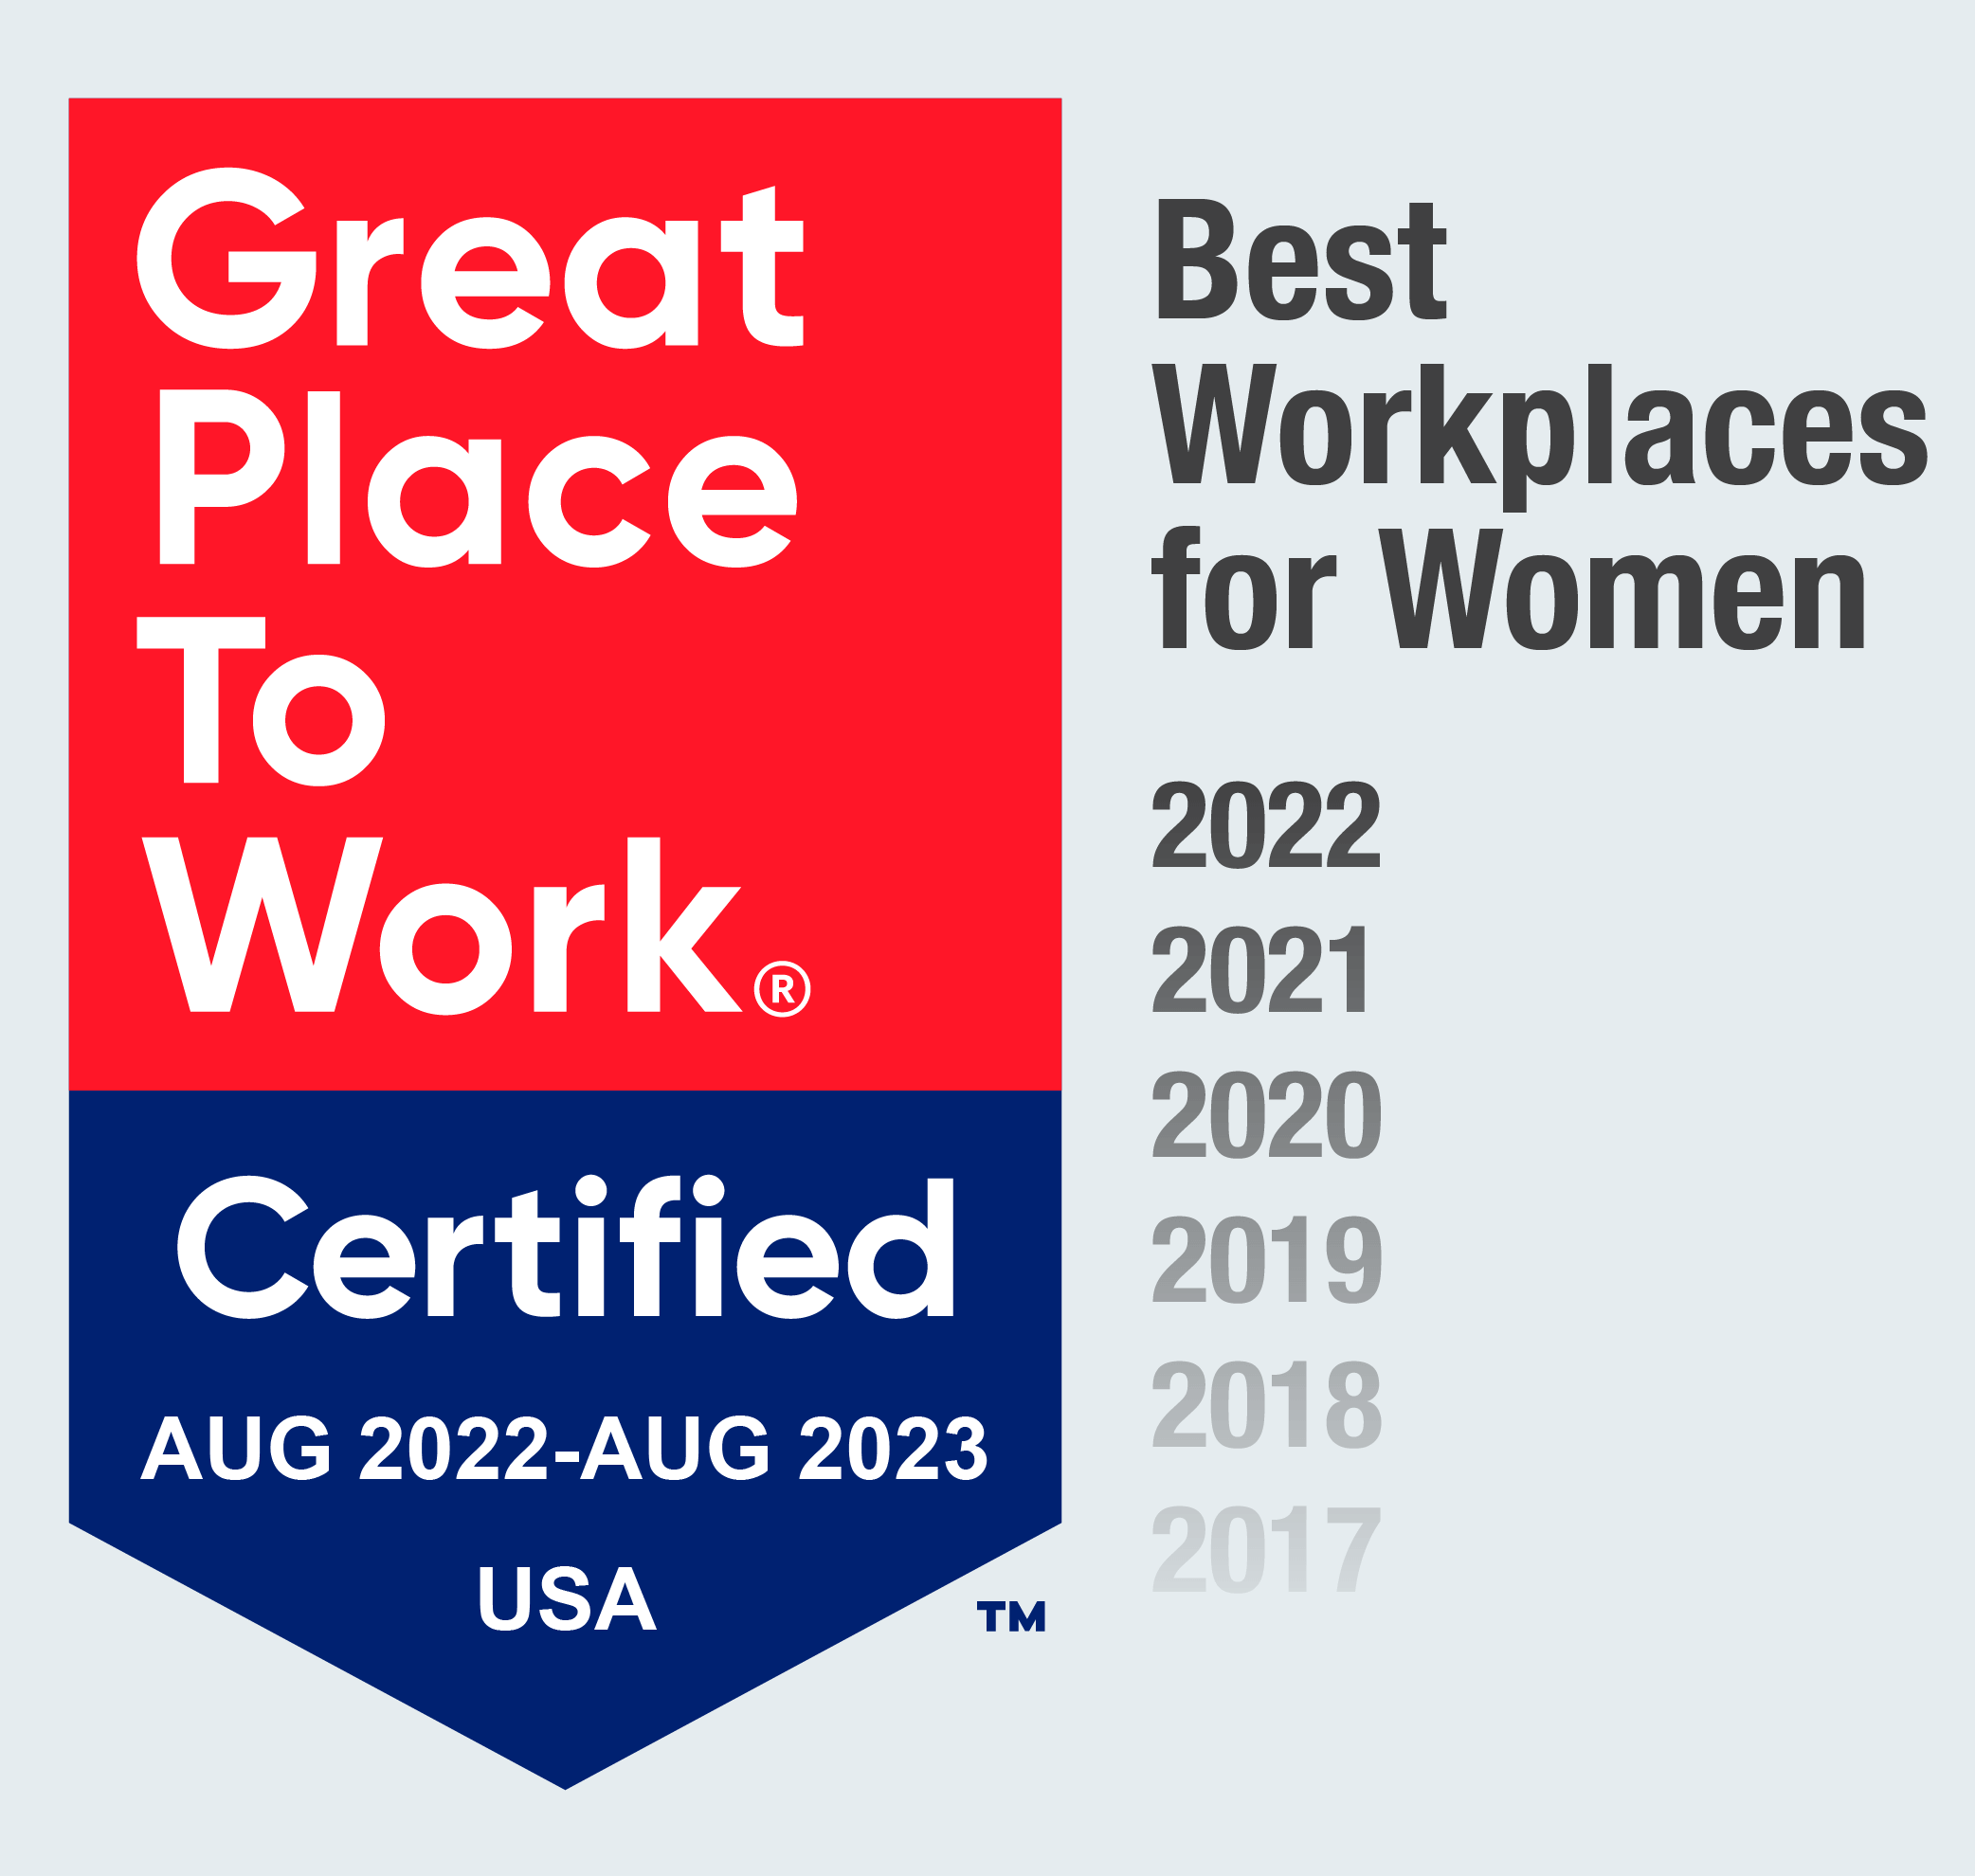 Kimley-Horn on FORTUNE’s Best Workplaces for Women